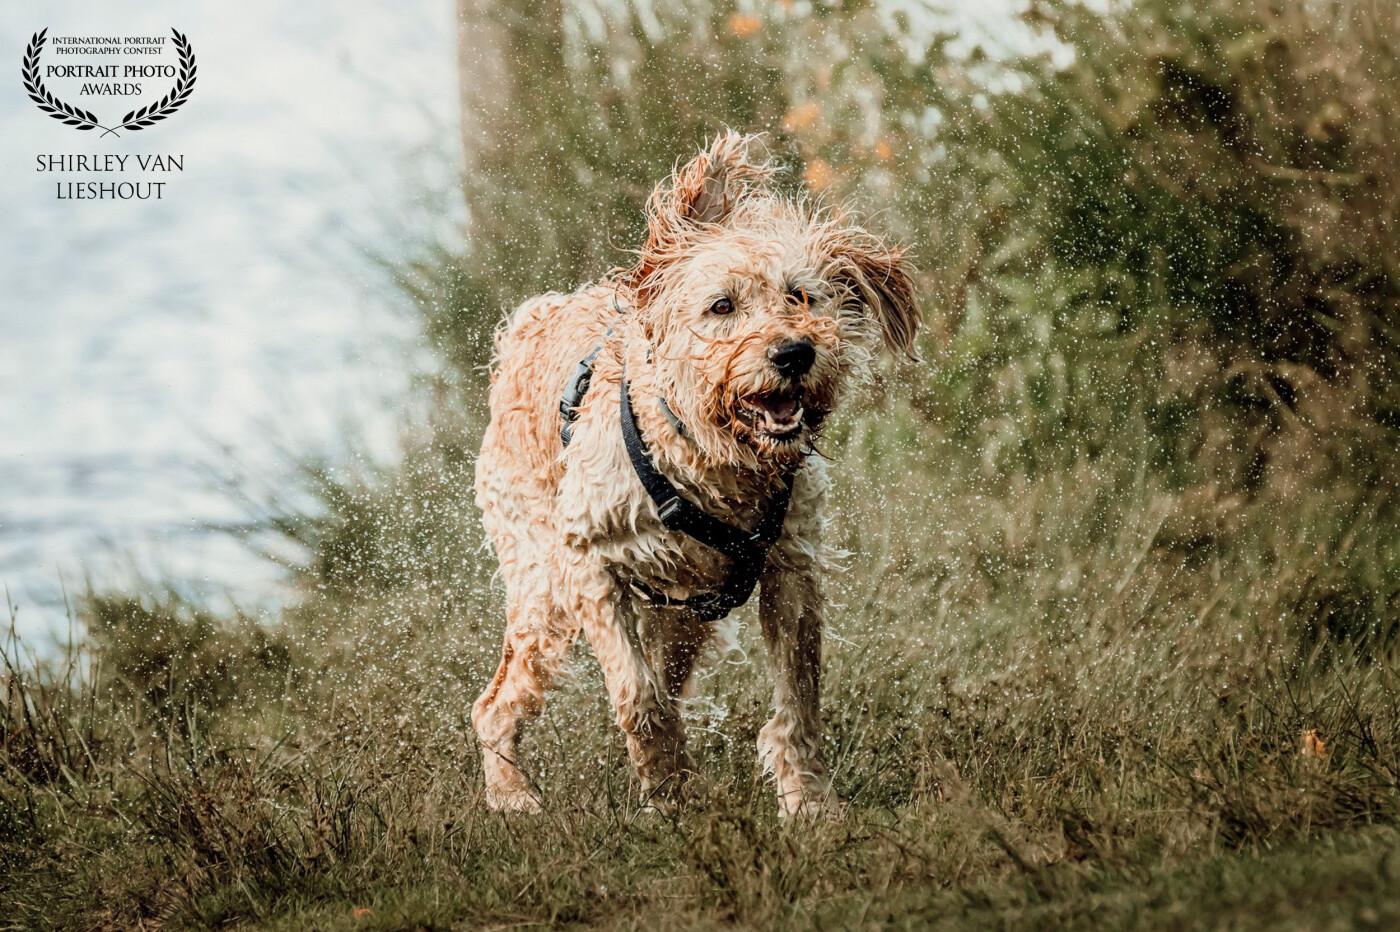 This lovely dog is Duco. I took this photo during a photography session of him and his owner for her business website. She owns a company in coaching people and their dogs  with the help of Duco. Being and stay playful in your life is important and that's exactly what Duco is showing us!